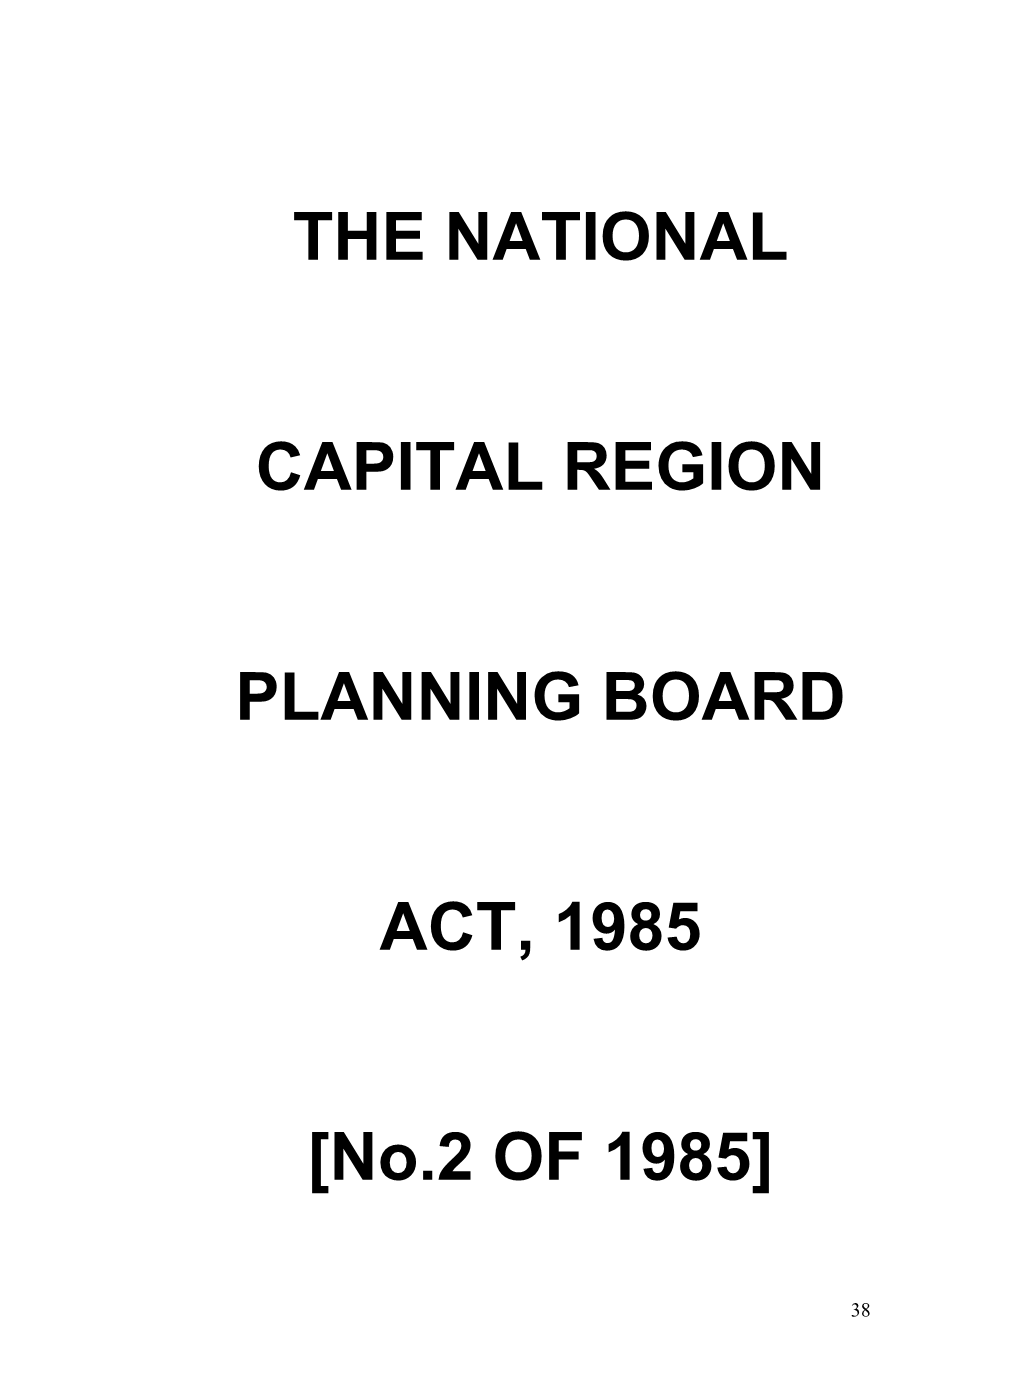 The National Capital Region Planning Board Act, 1985